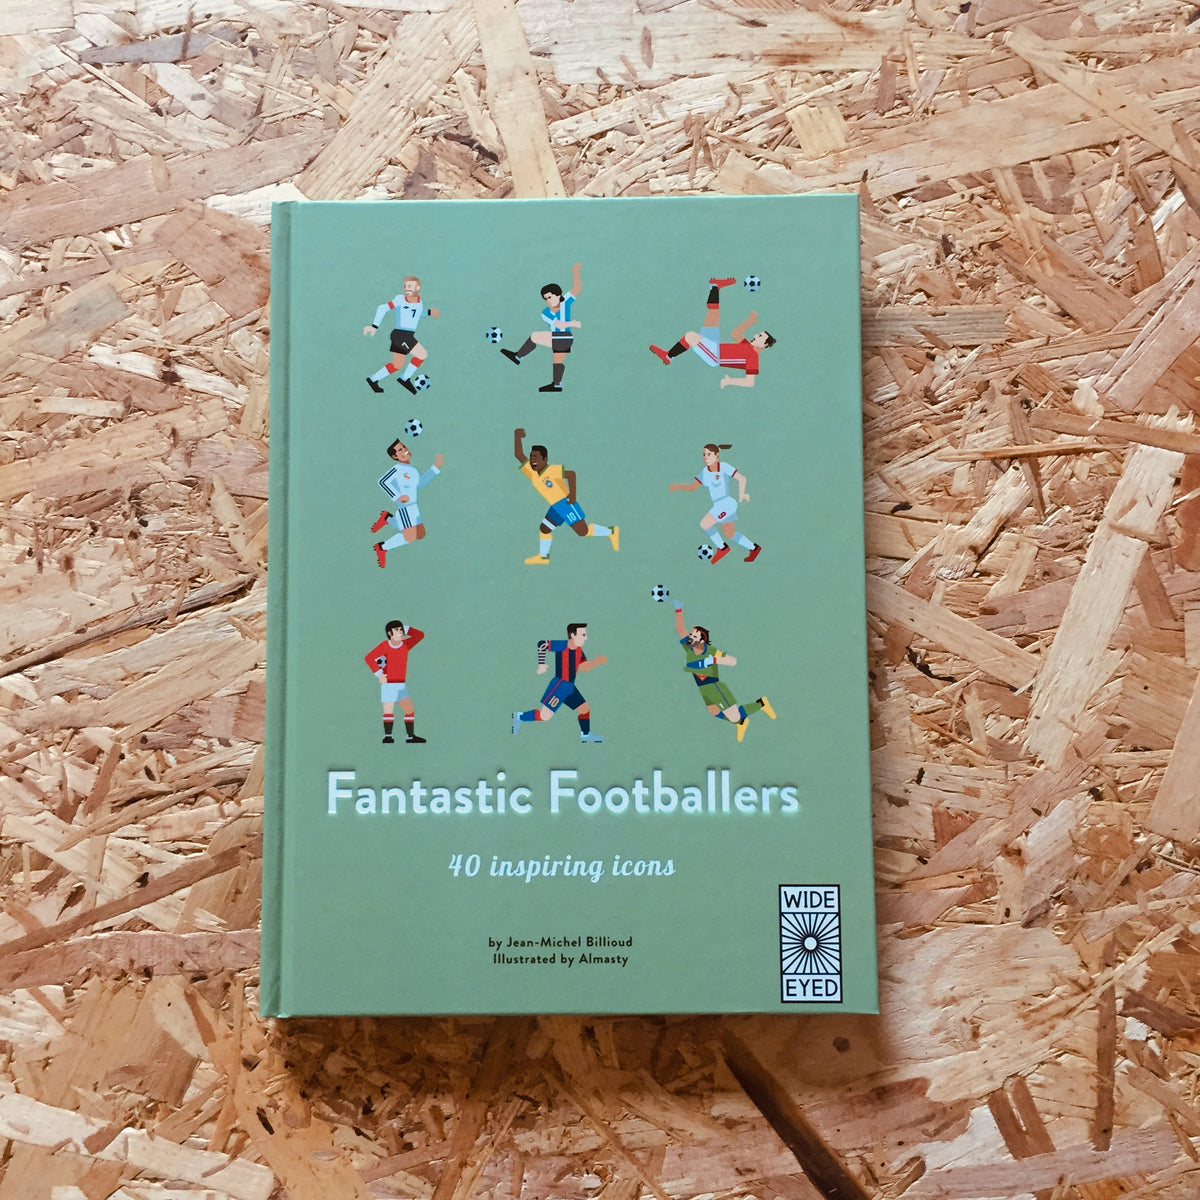 –　40　game　Inspiring　Fantastic　Icons:　Footballers:　Meet　40　changers　Stanchion